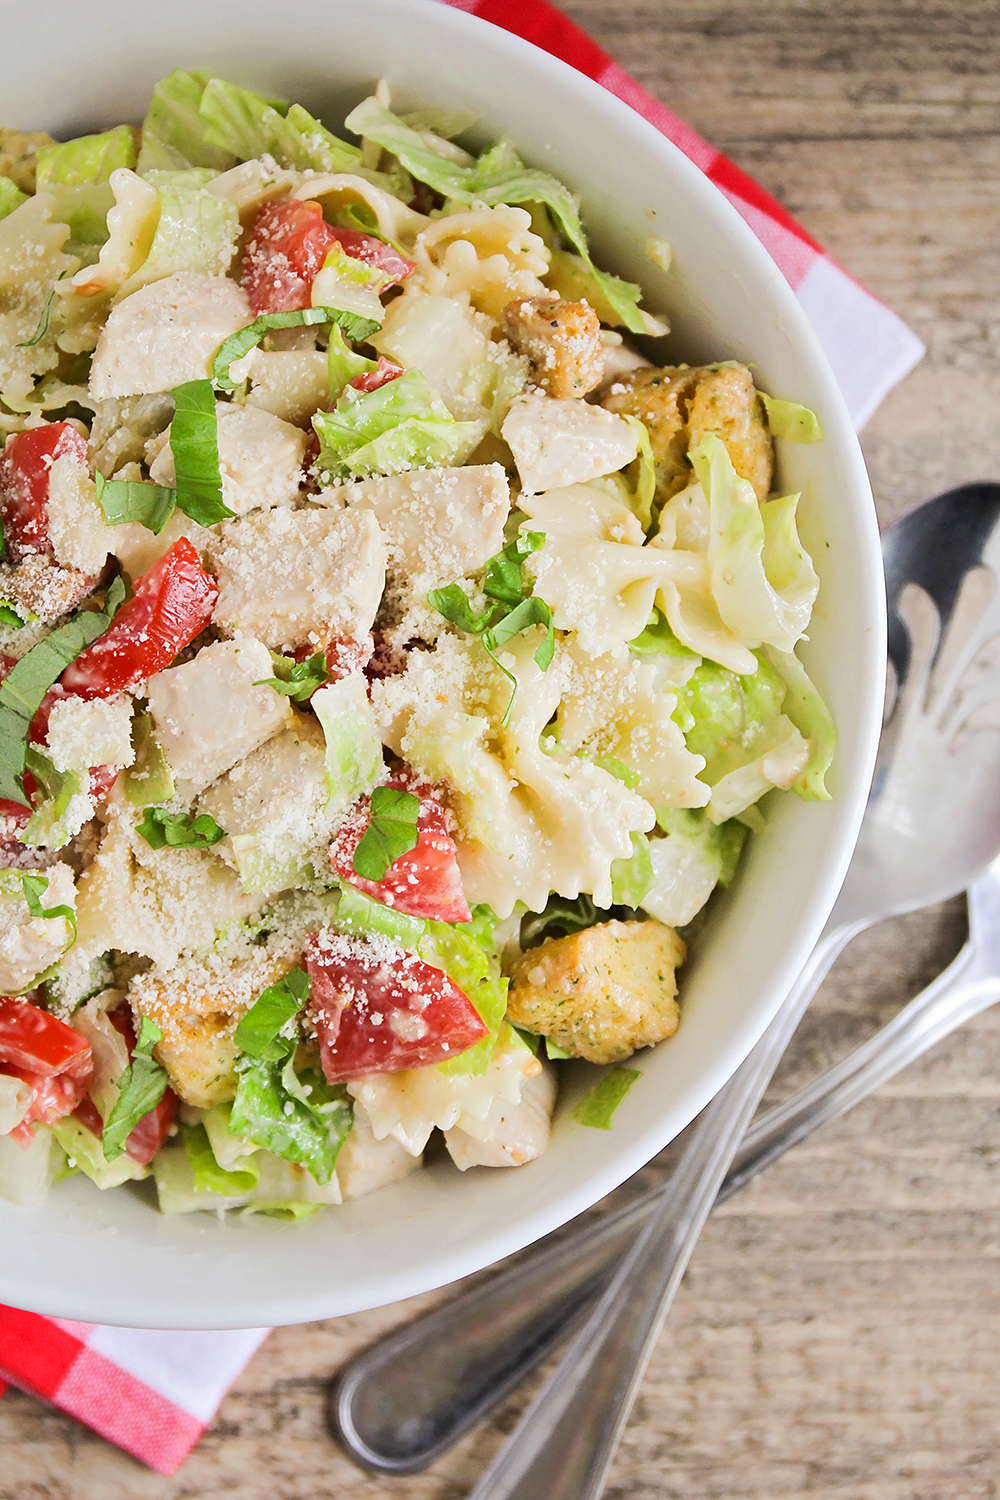 This delicious and zesty chicken caesar pasta salad is quick and easy to make, and perfect for a light summer meal!